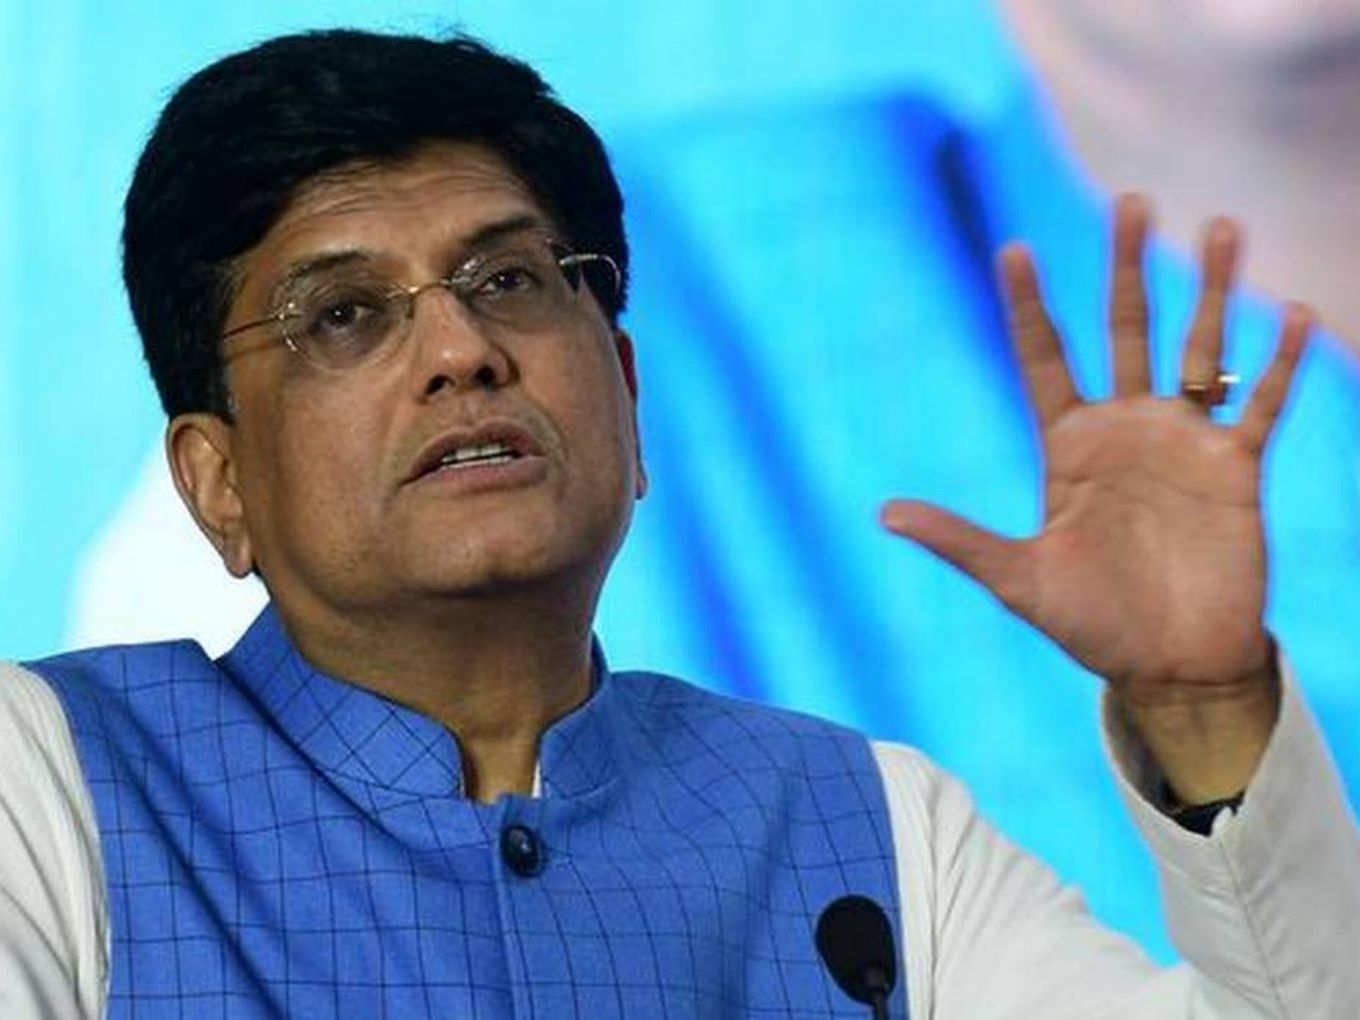 After Ecommerce Giants, Piyush Goyal Ropes In Zomato, Swiggy Over NRAI Complaints